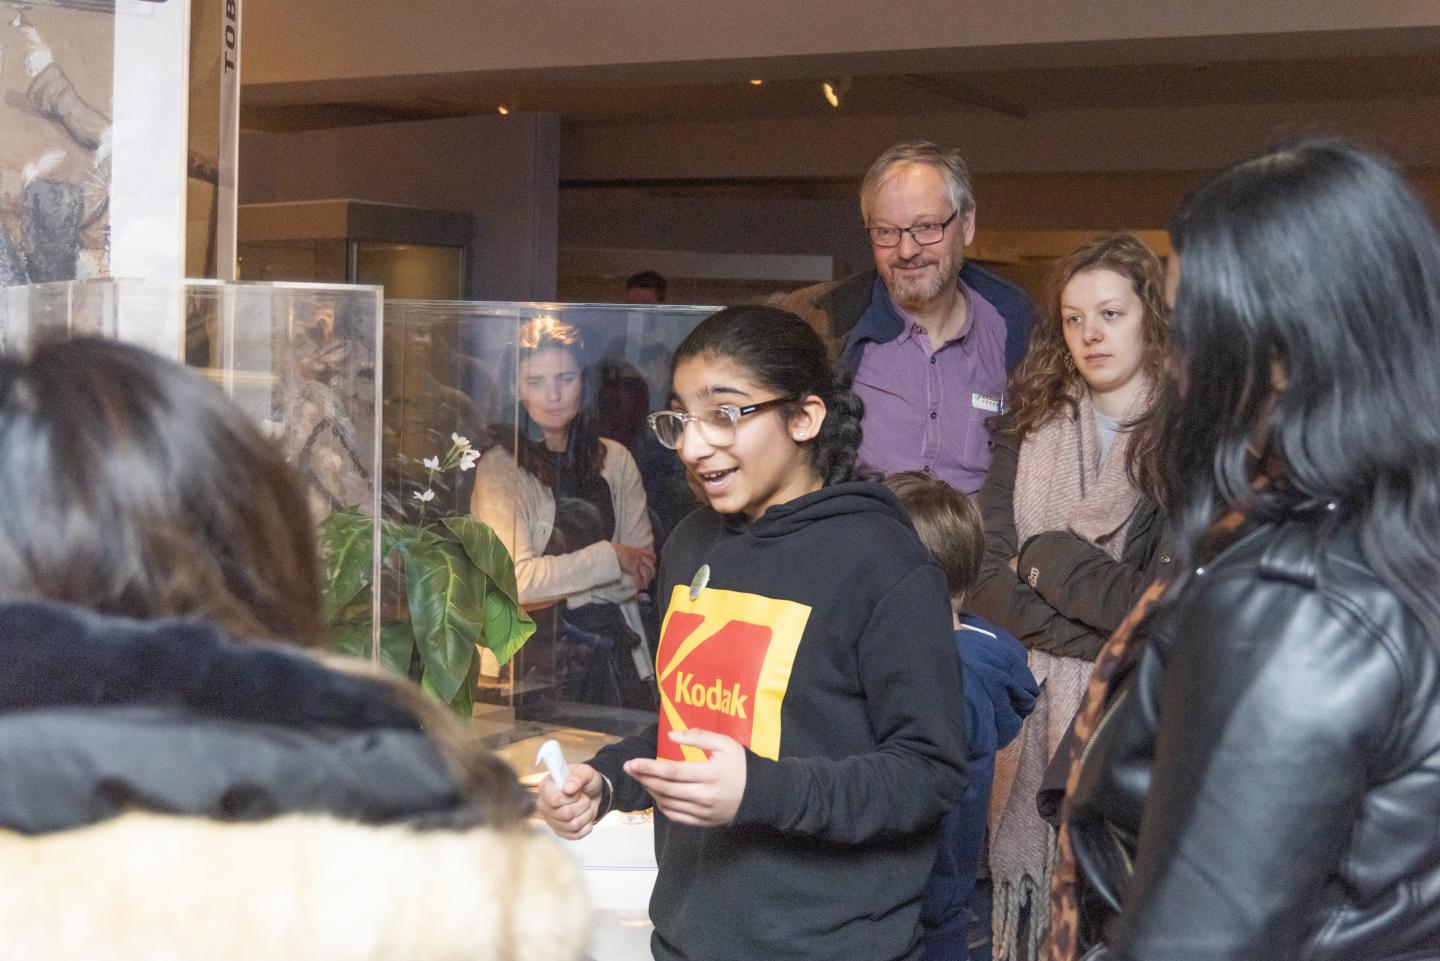 A young person delivering a tour in the galleries